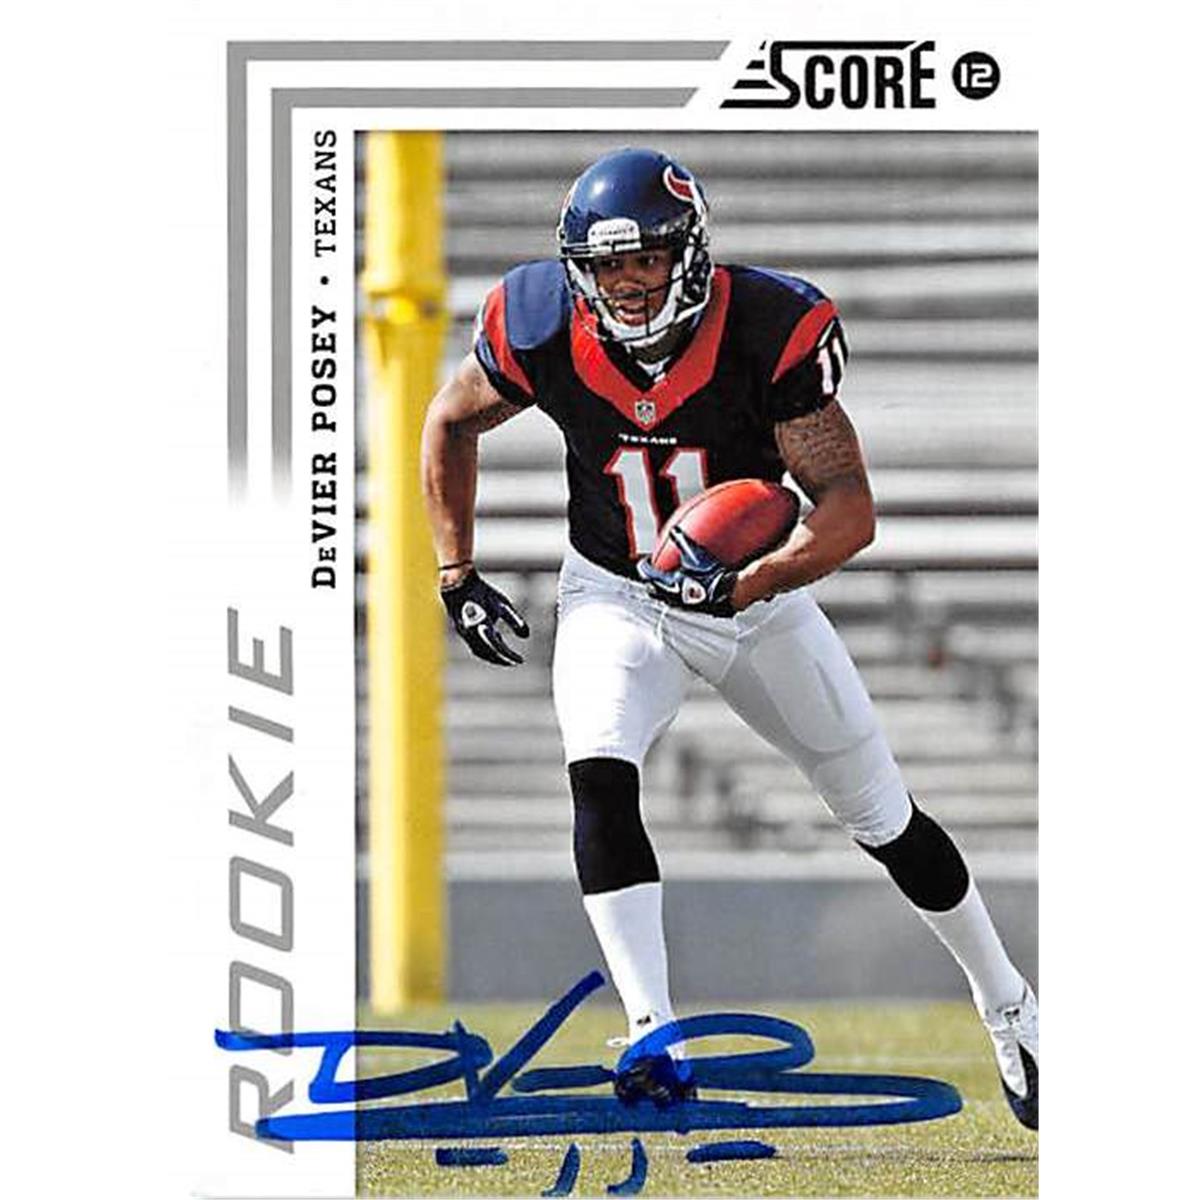 432575 Devier Posey Autographed Football Card 2012 Score No. 323 Rookie for Houston Texans -  Autograph Warehouse